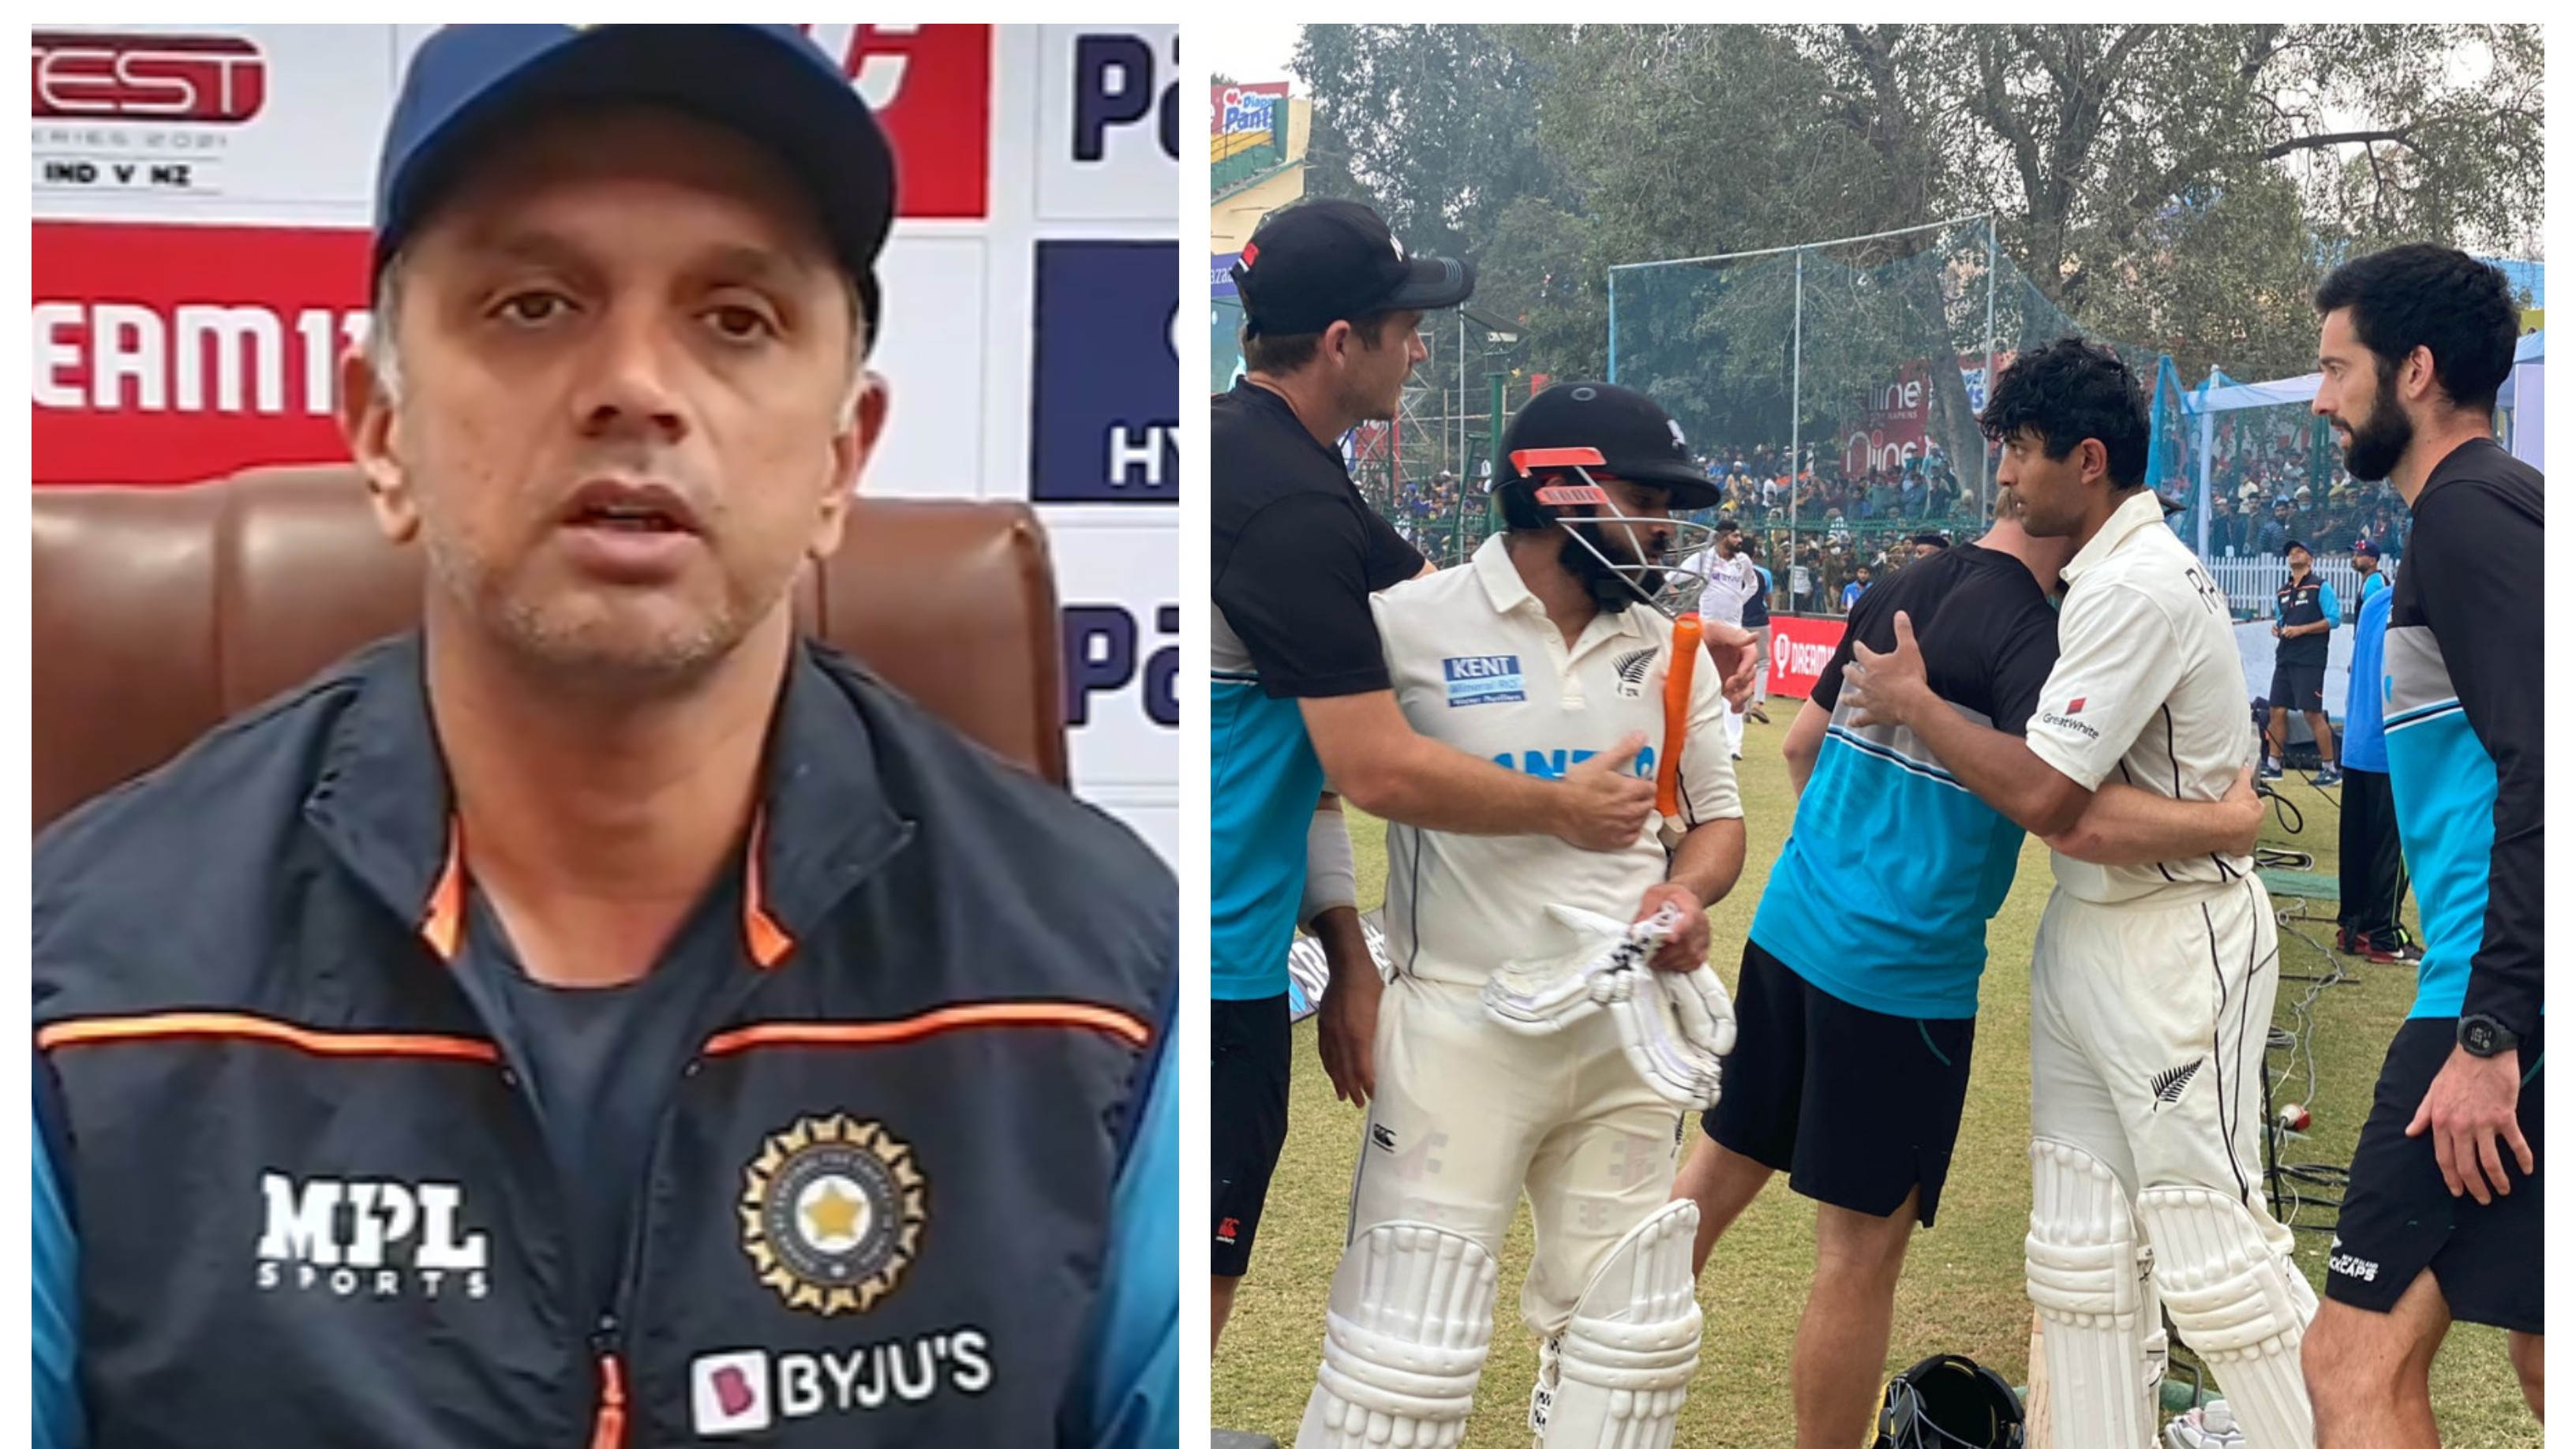 IND v NZ 2021: ‘It was quite an unresponsive pitch on Day 5’, Rahul Dravid after Kanpur Test ends in a draw